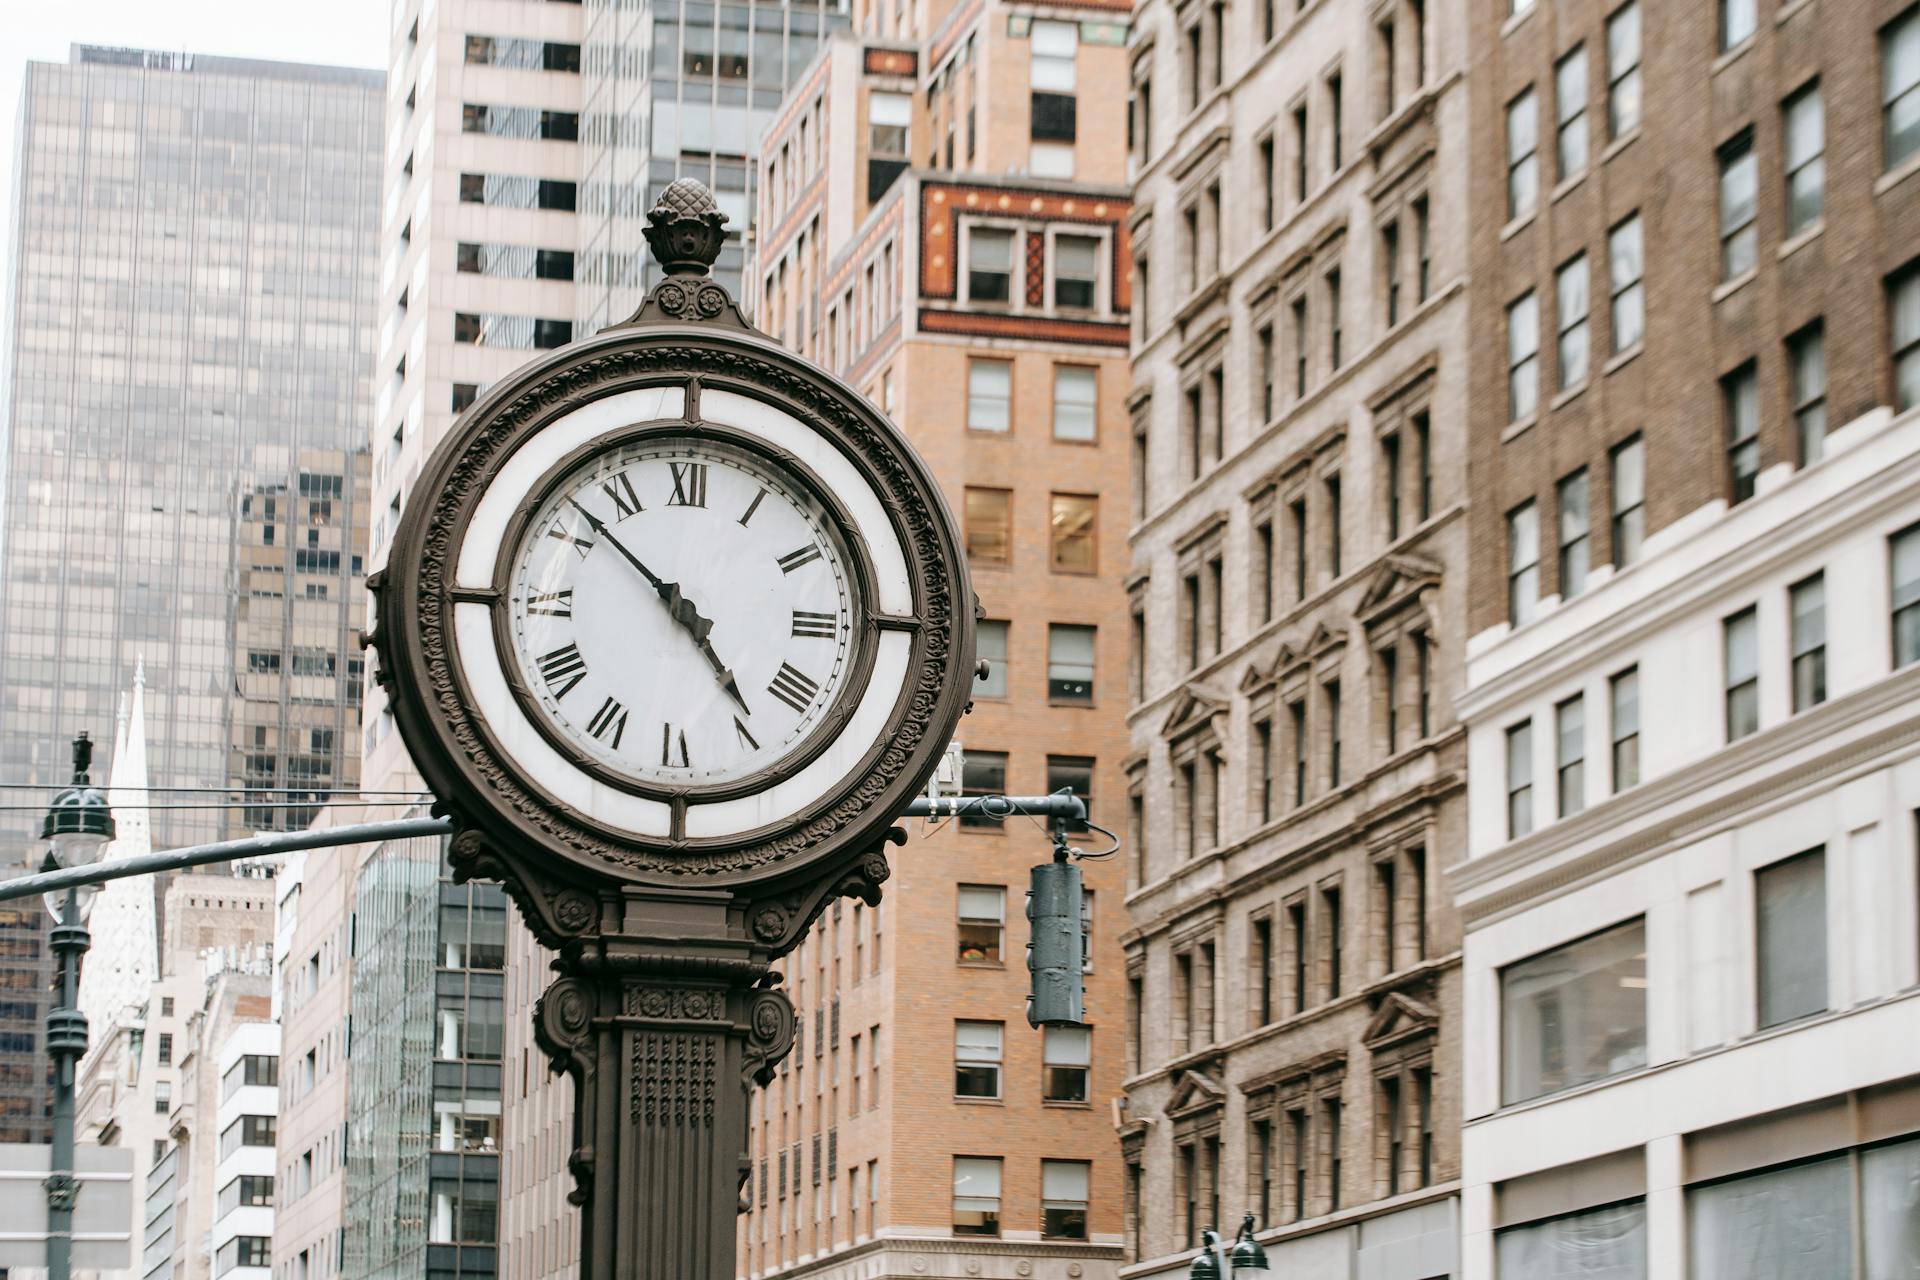 Vintage street clock on pillar located near residential buildings and skyscrapers in downtown of New York city in financial district